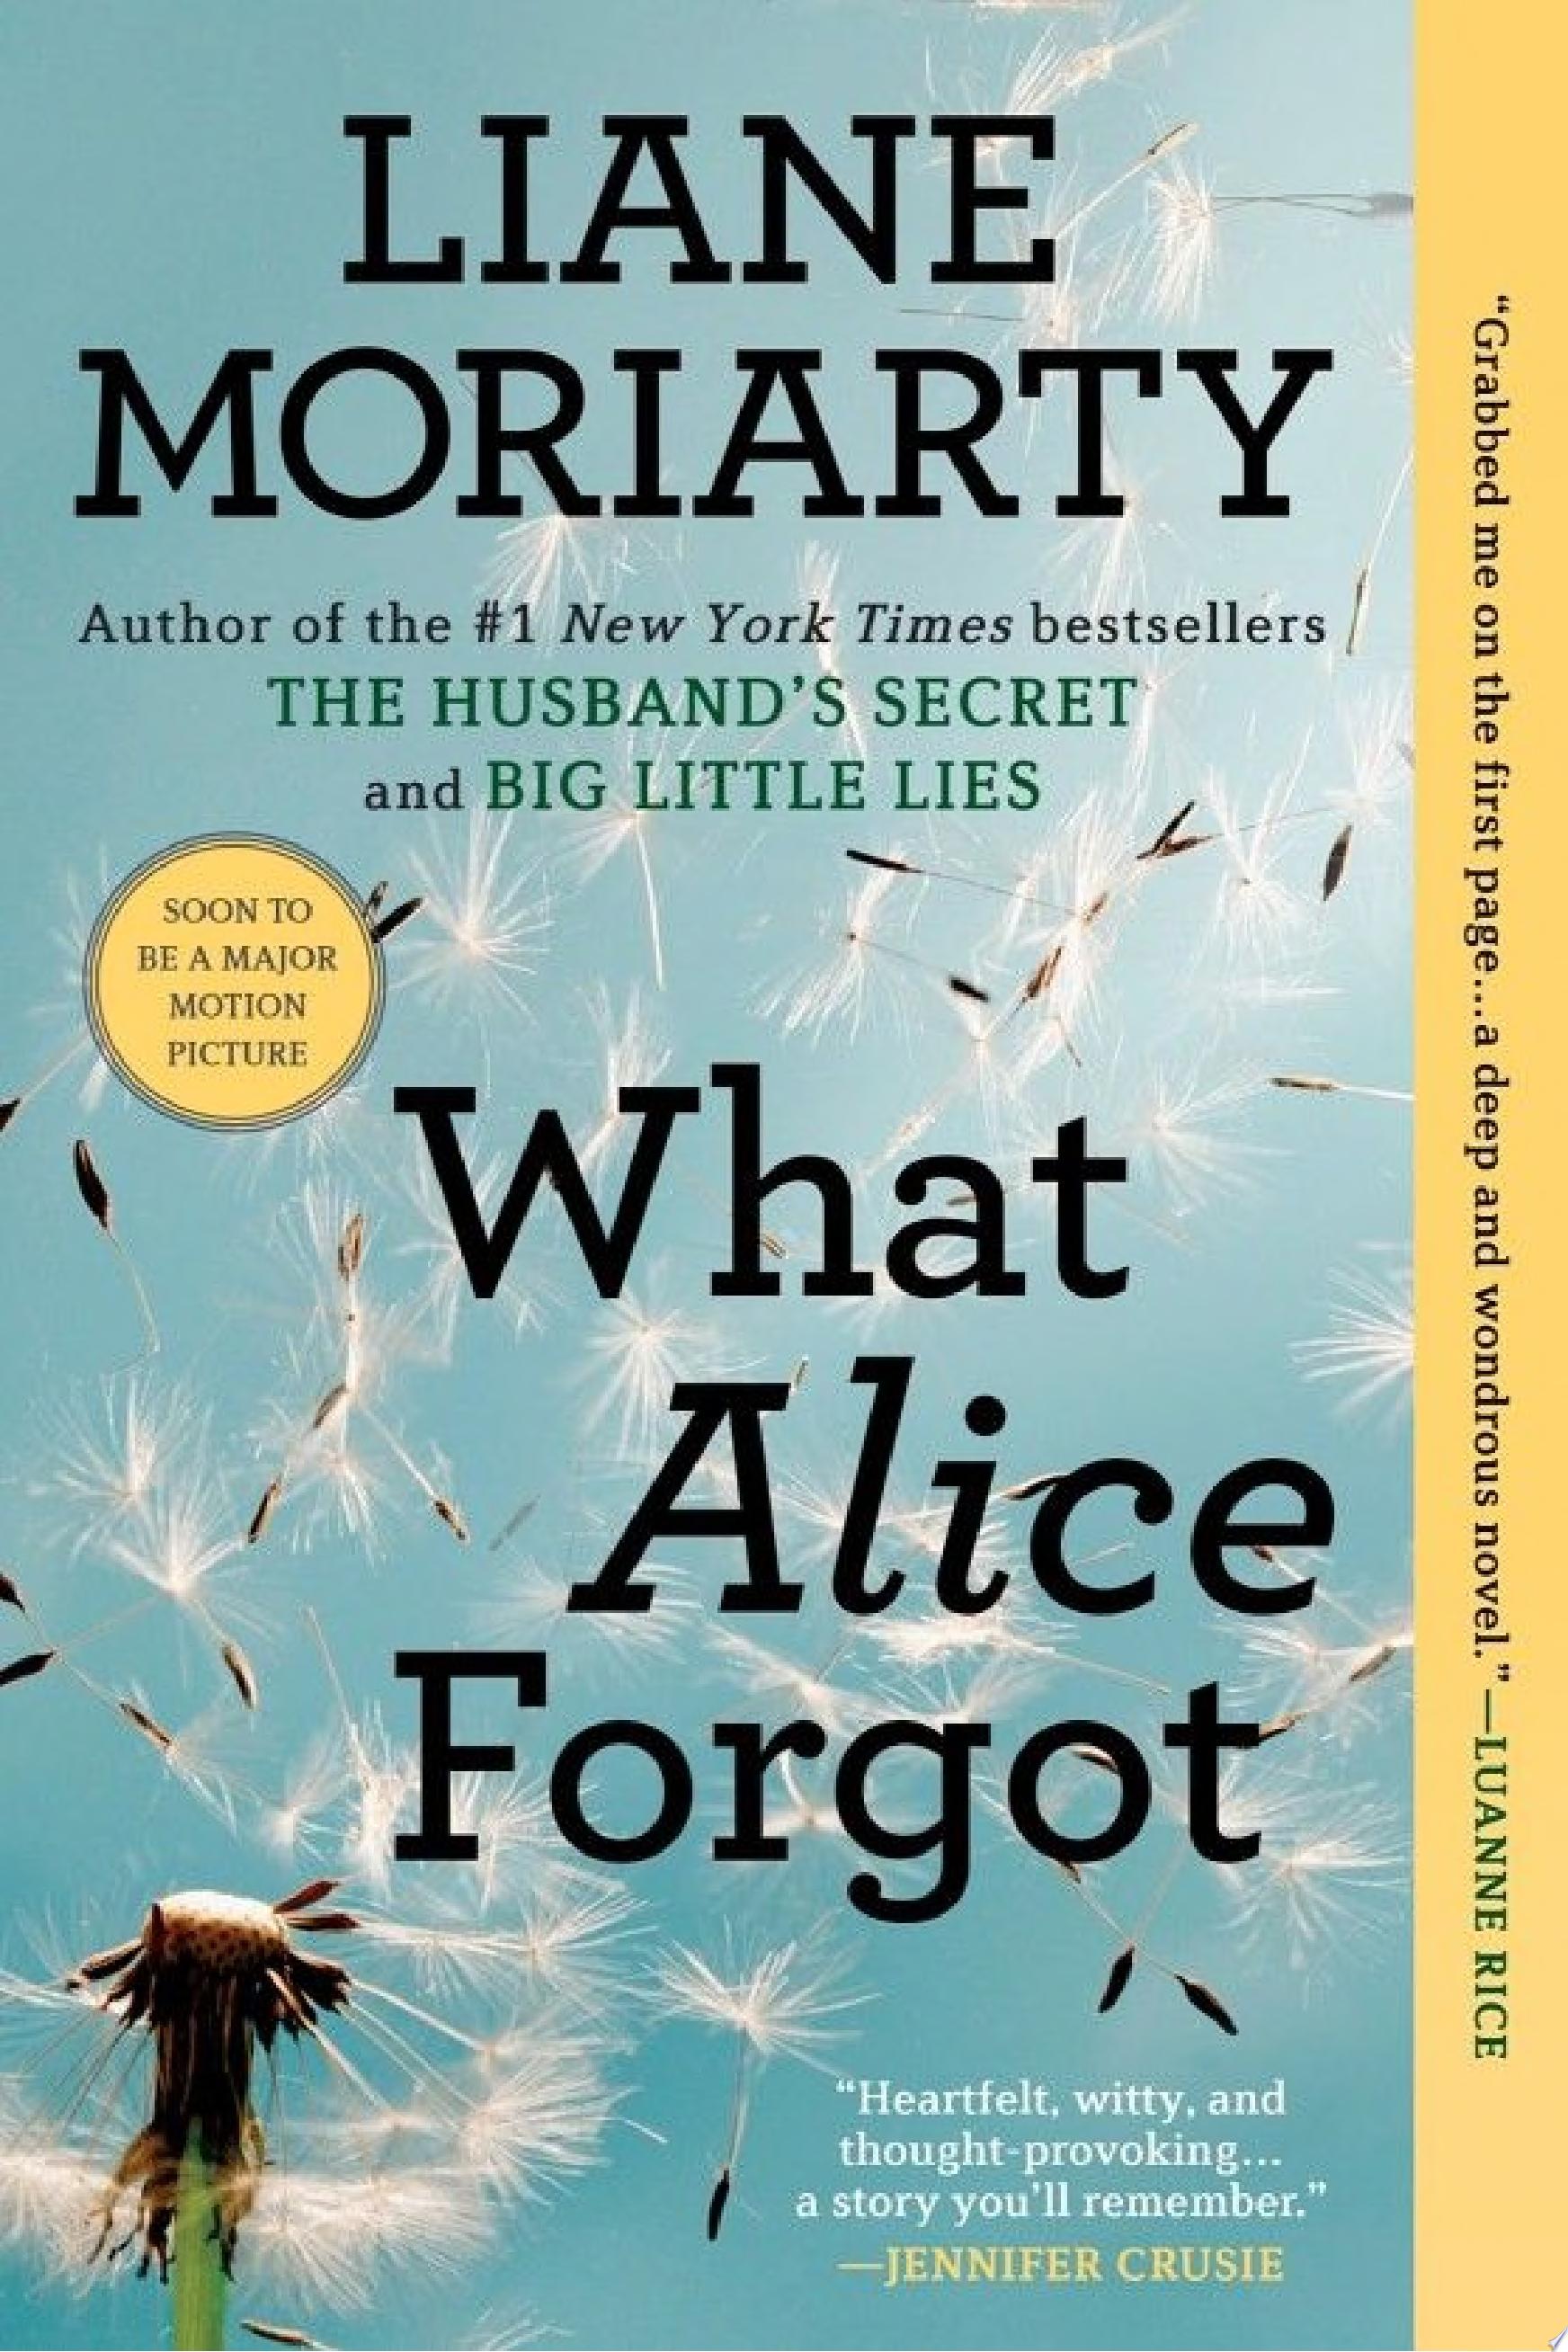 Image for "What Alice Forgot"